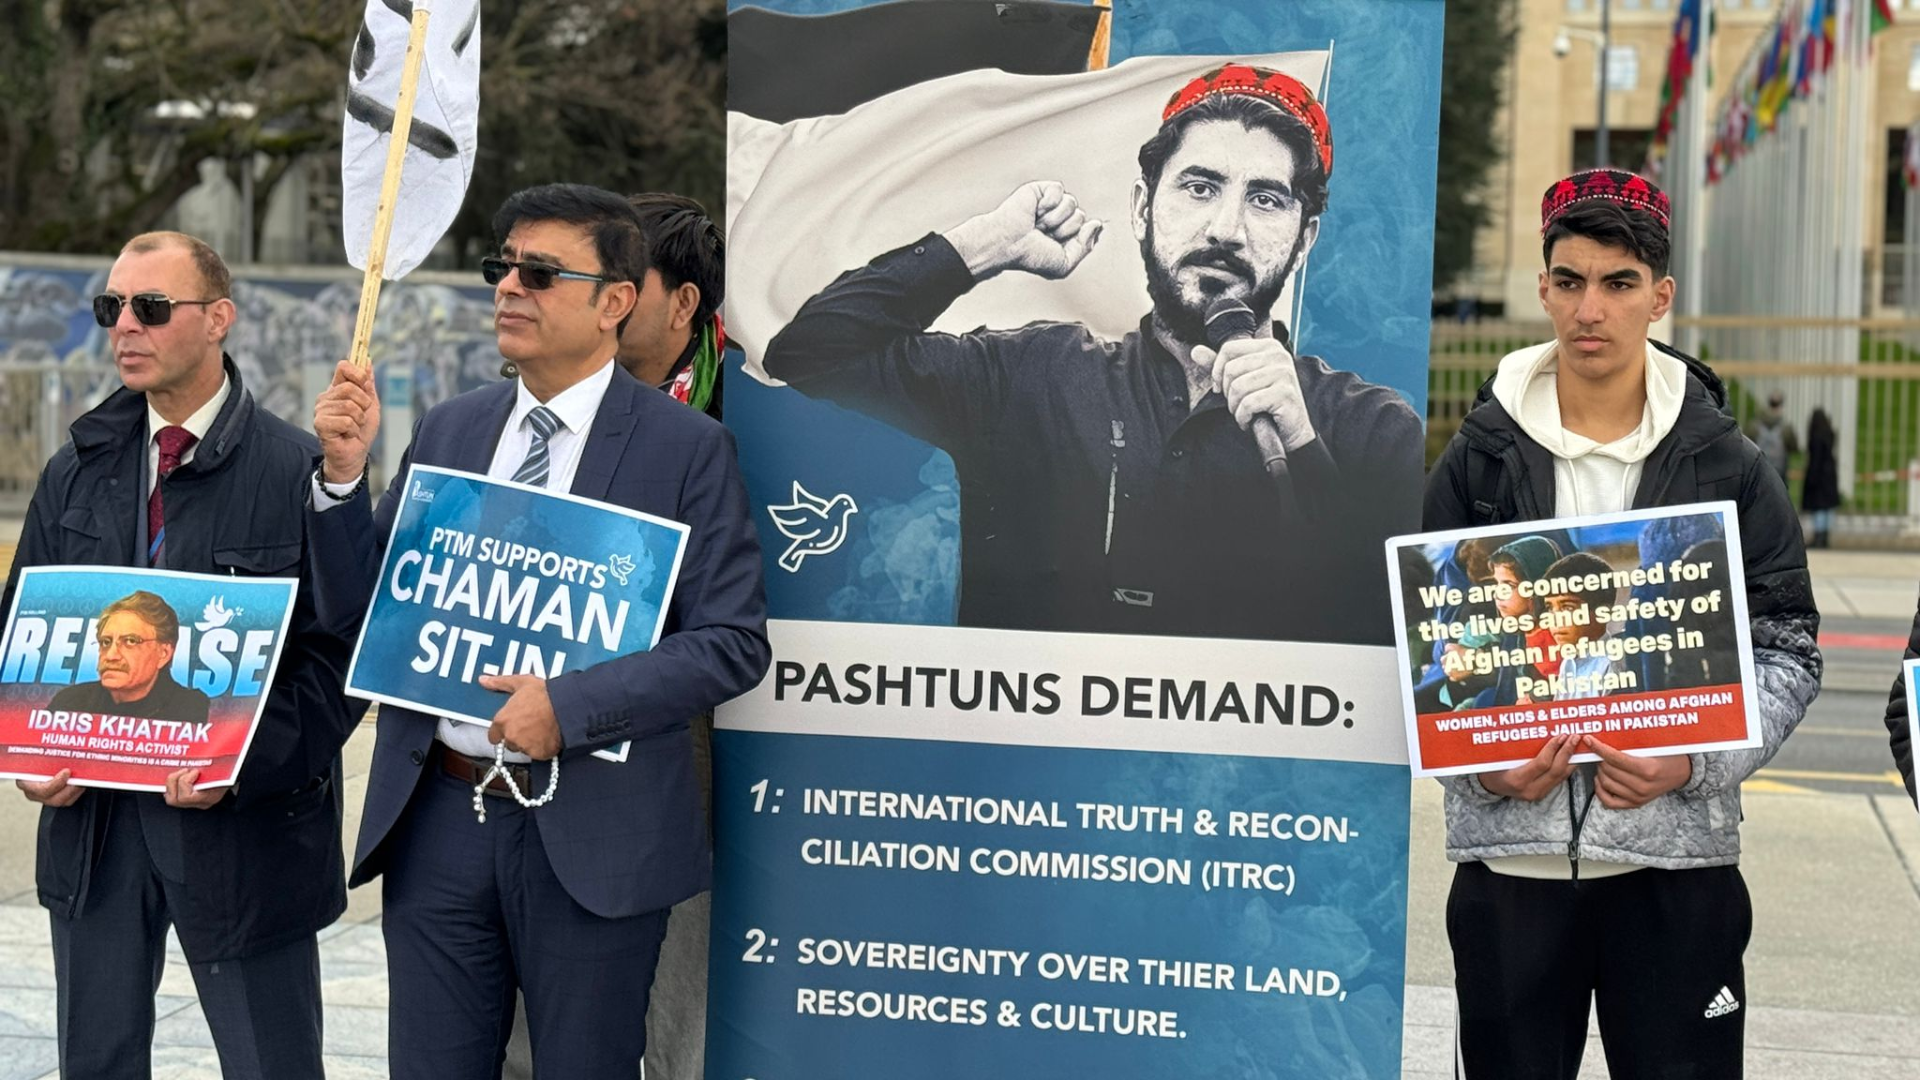 Pashtuns protest at UNHRC over PTM leaders’ crackdown by Pakistan